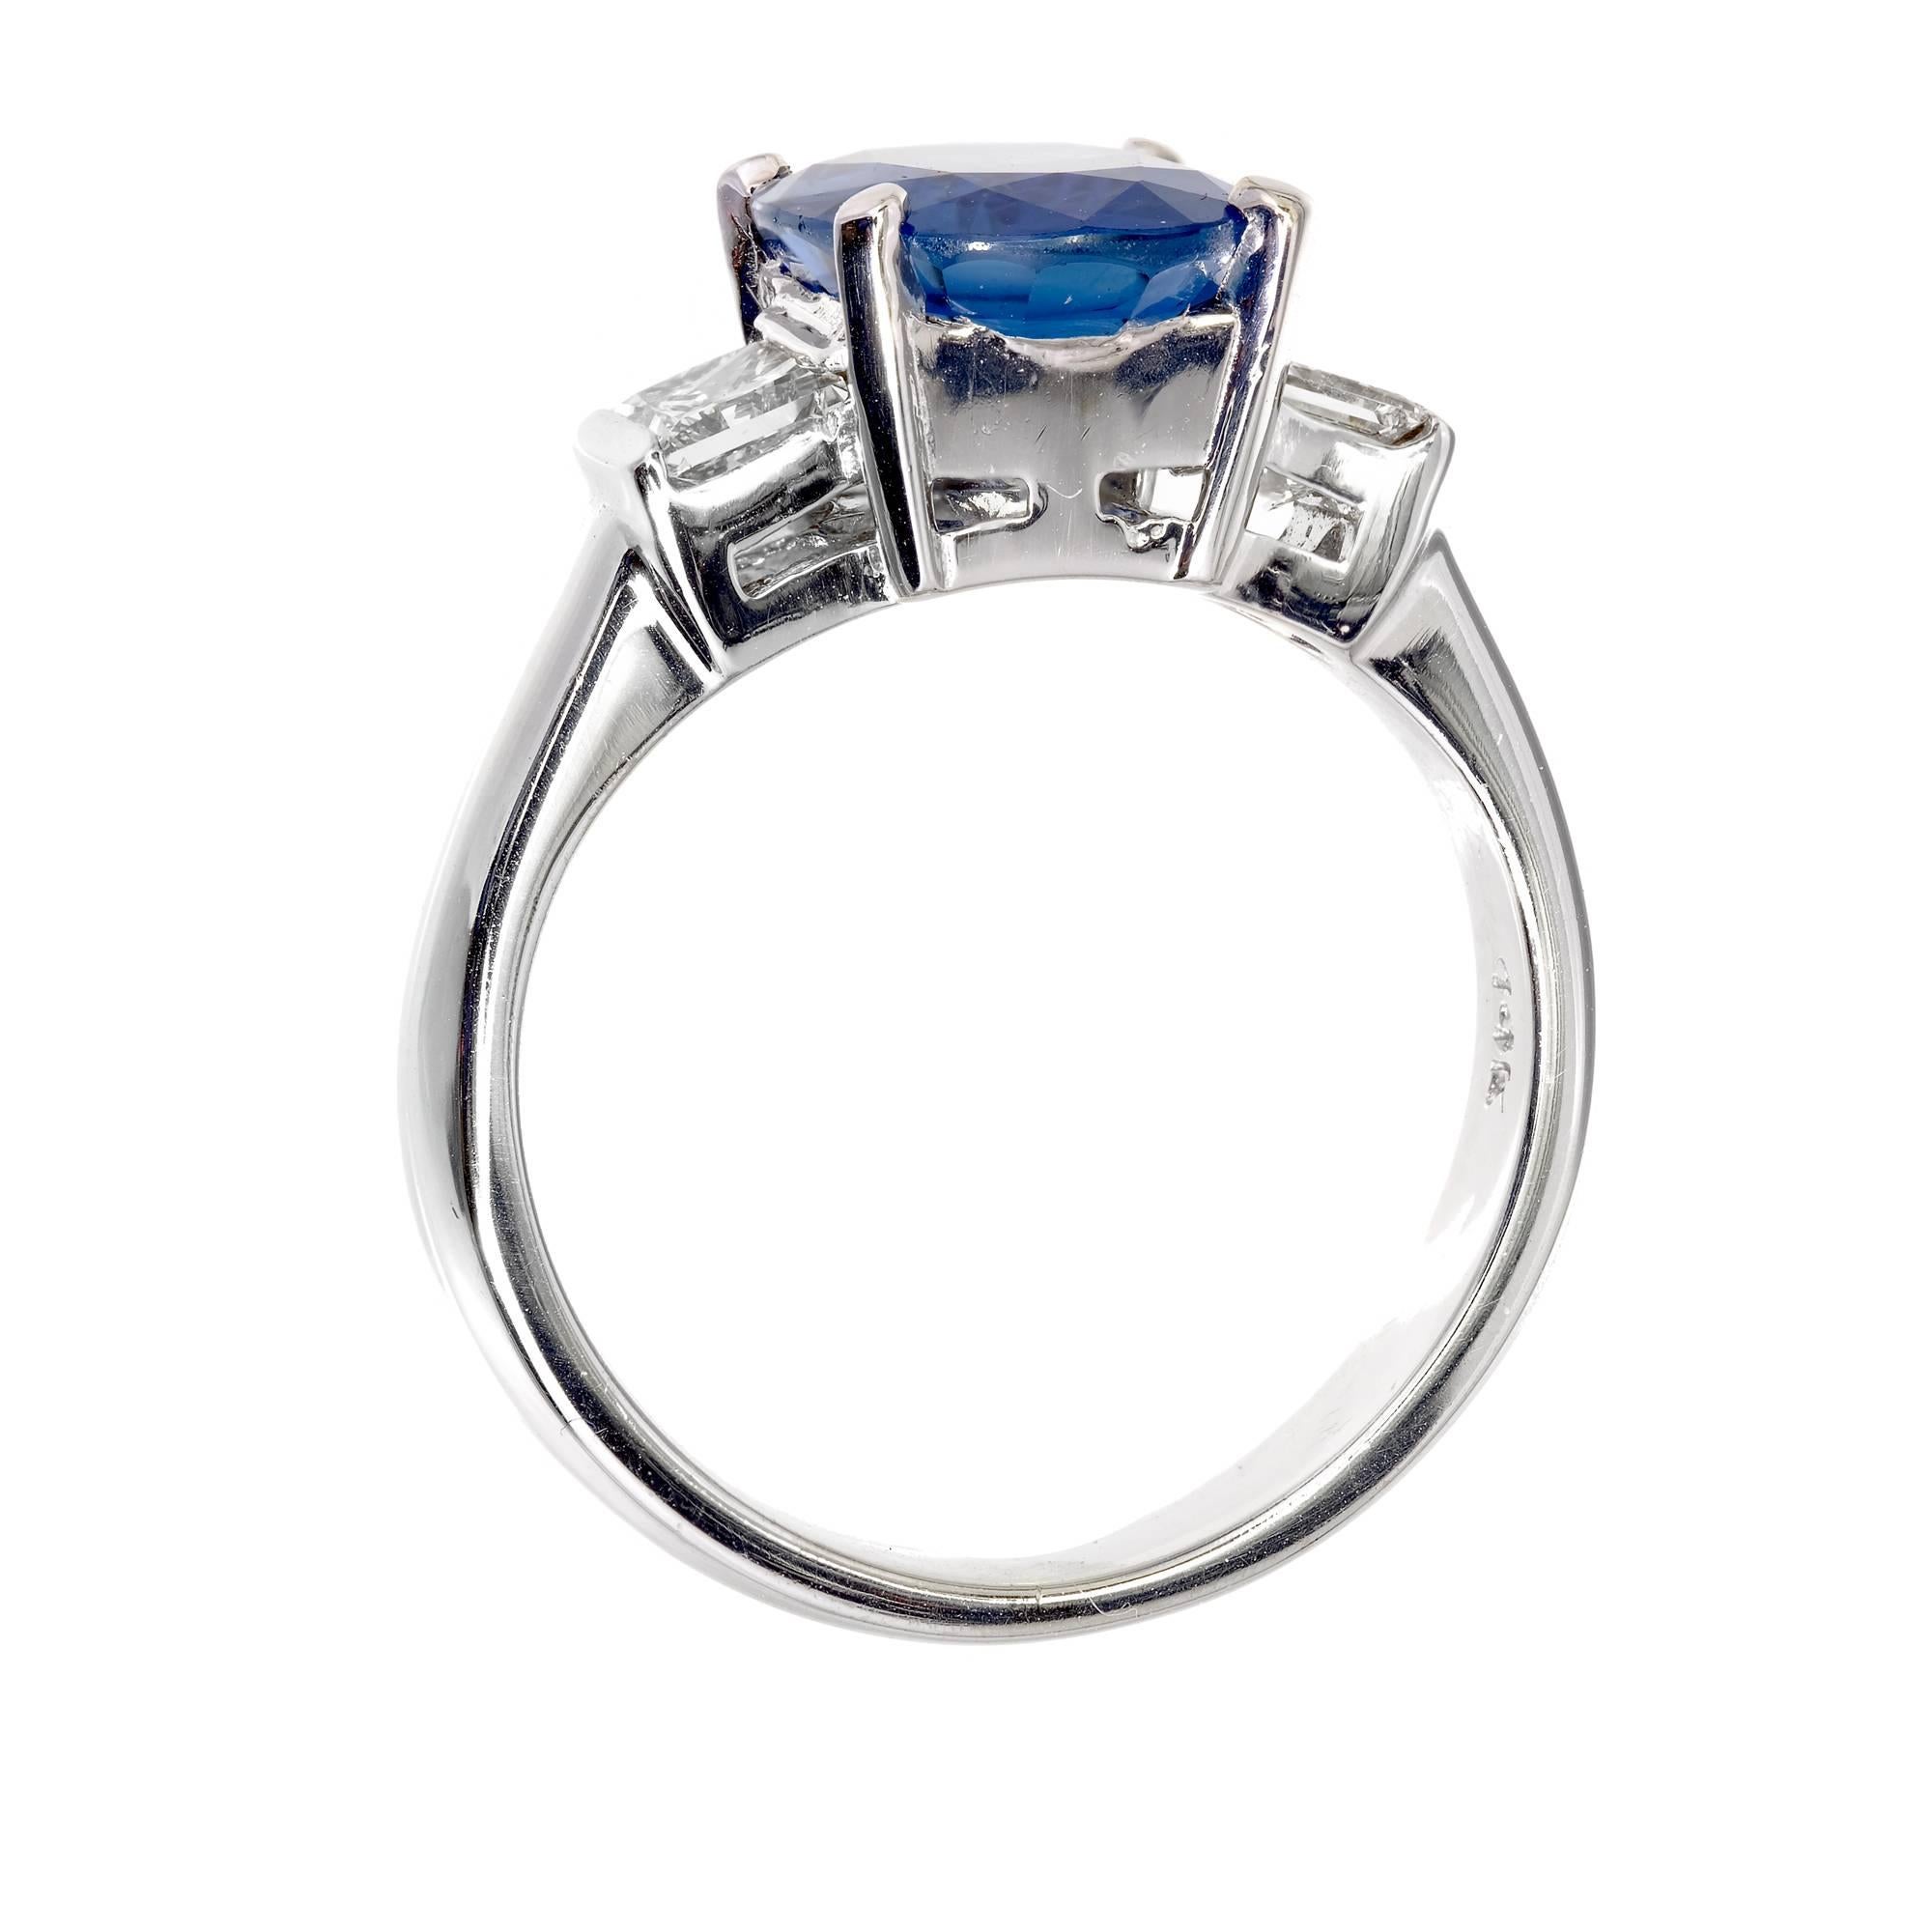 oval diamond with sapphire side stones